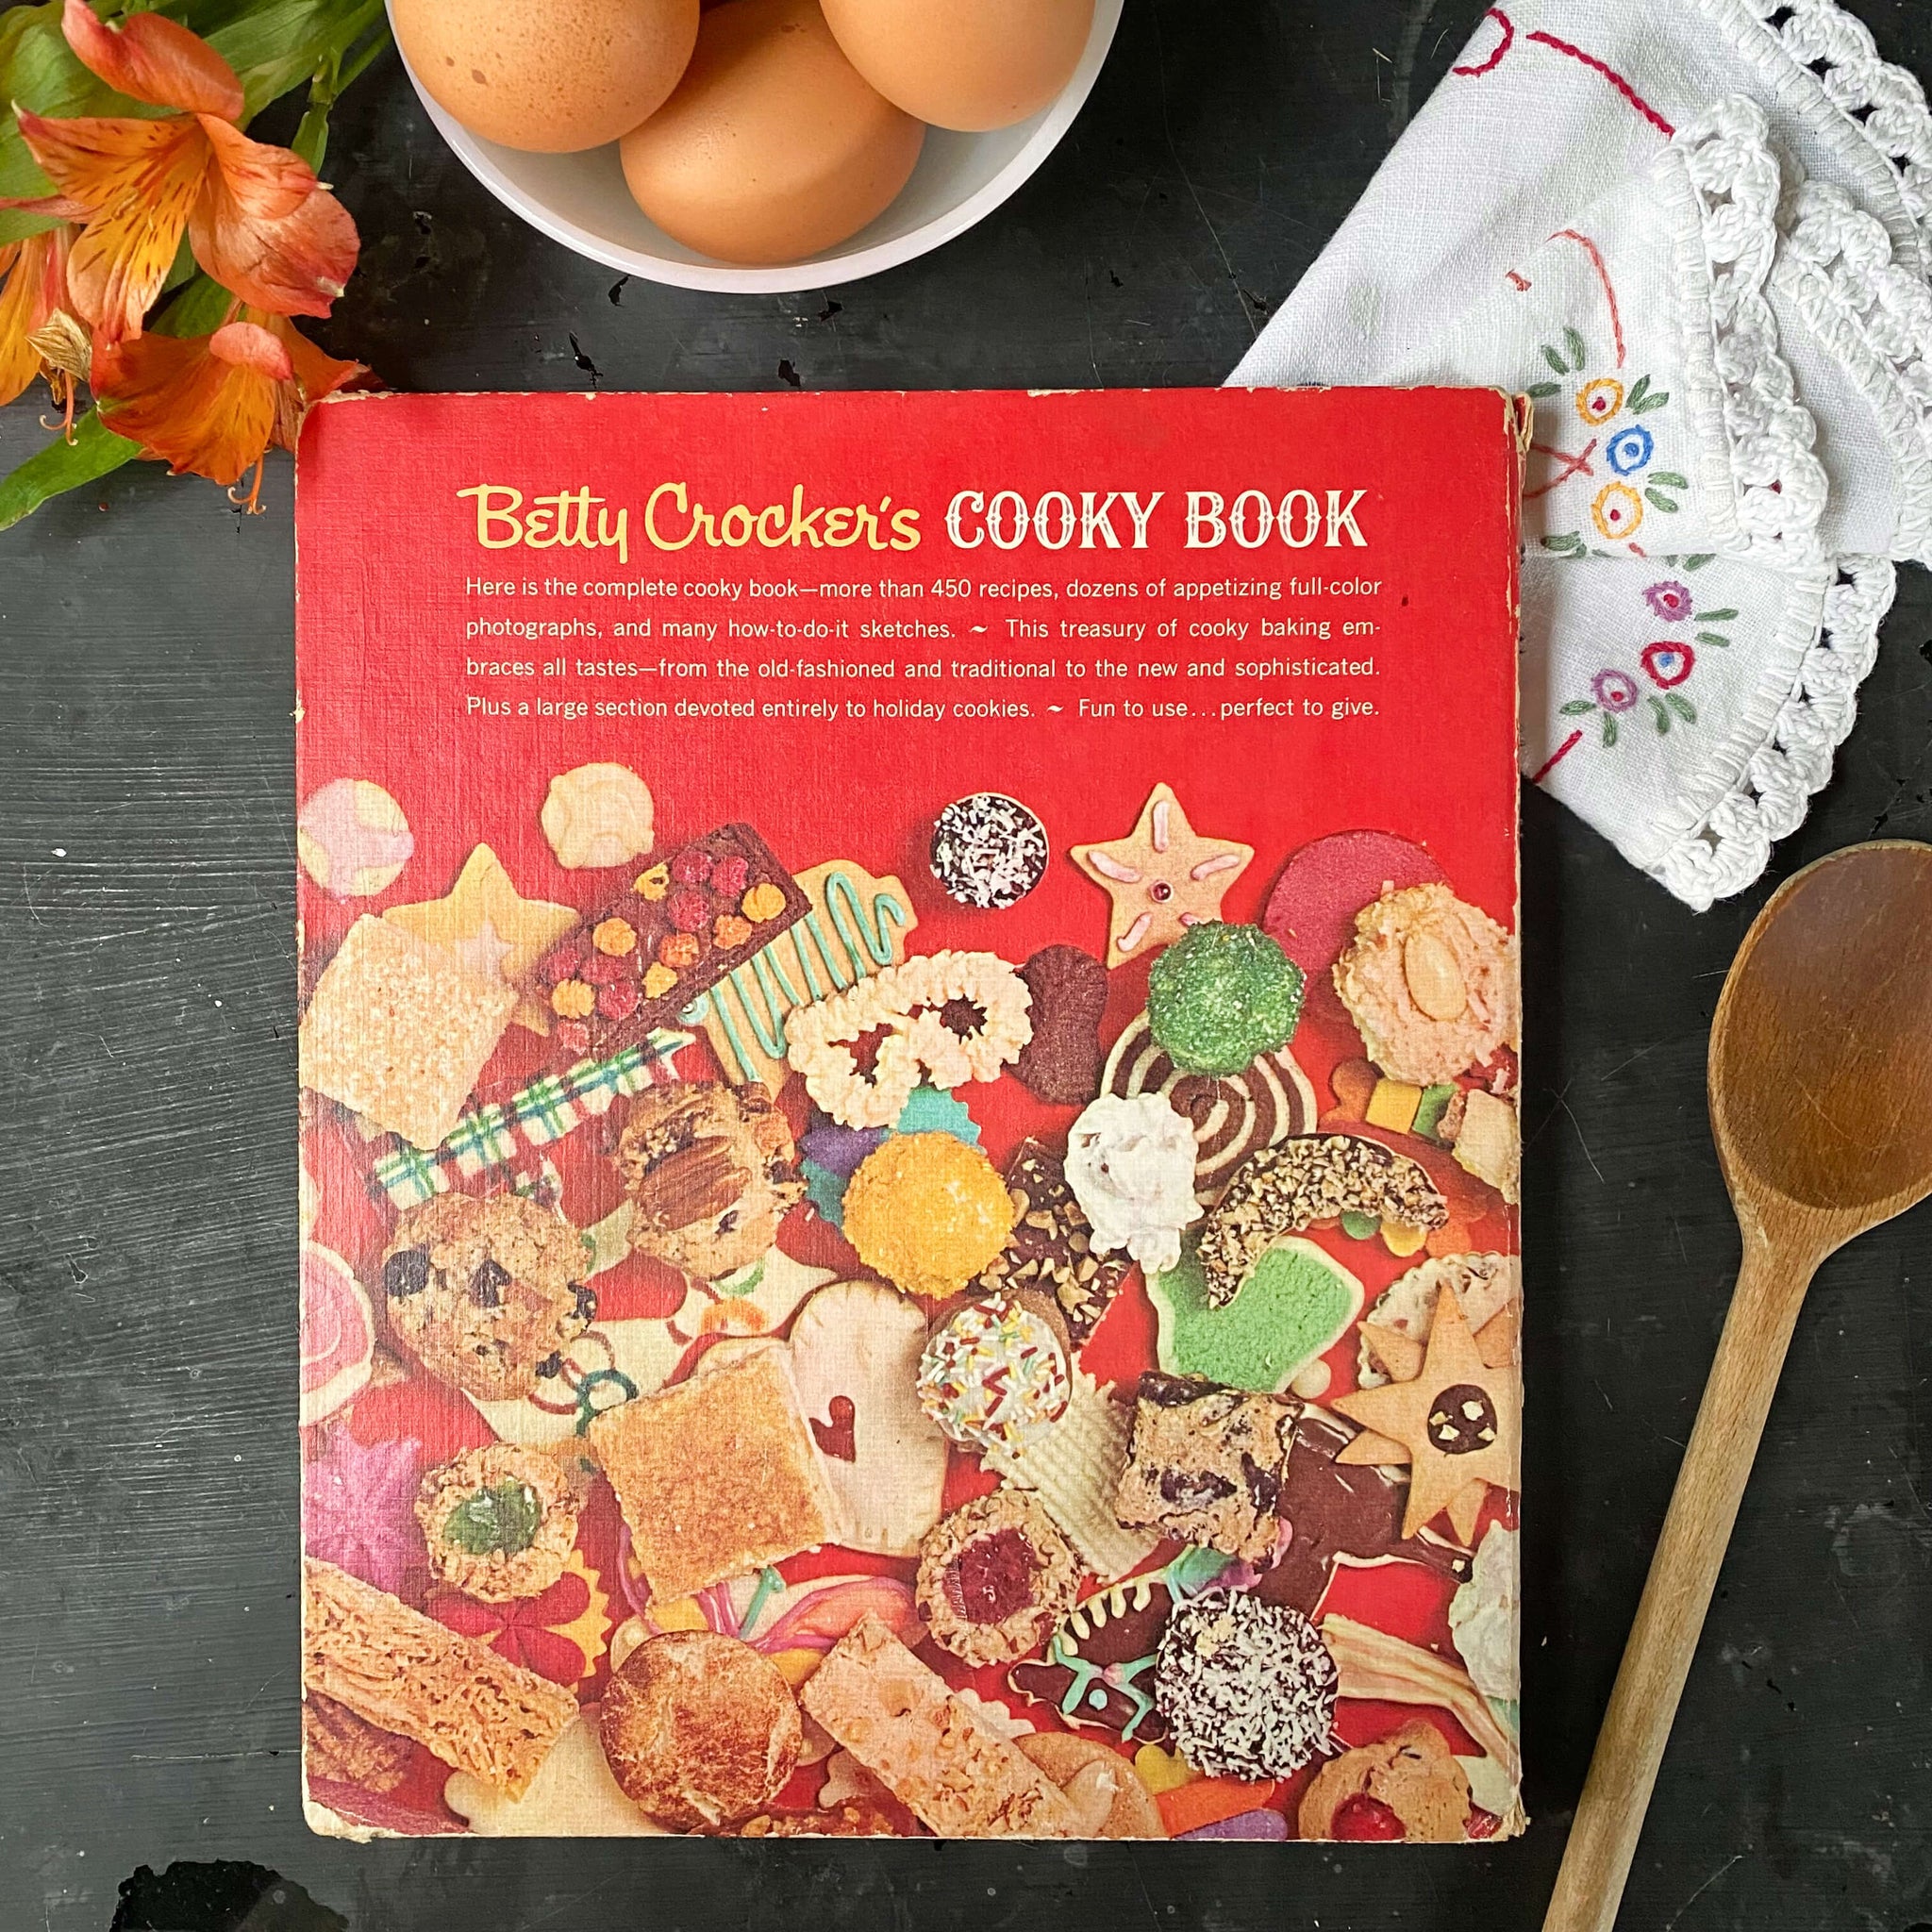 Betty Crocker's Cooky Book - 1963 First Edition Third Printing with Homemade Bookmark